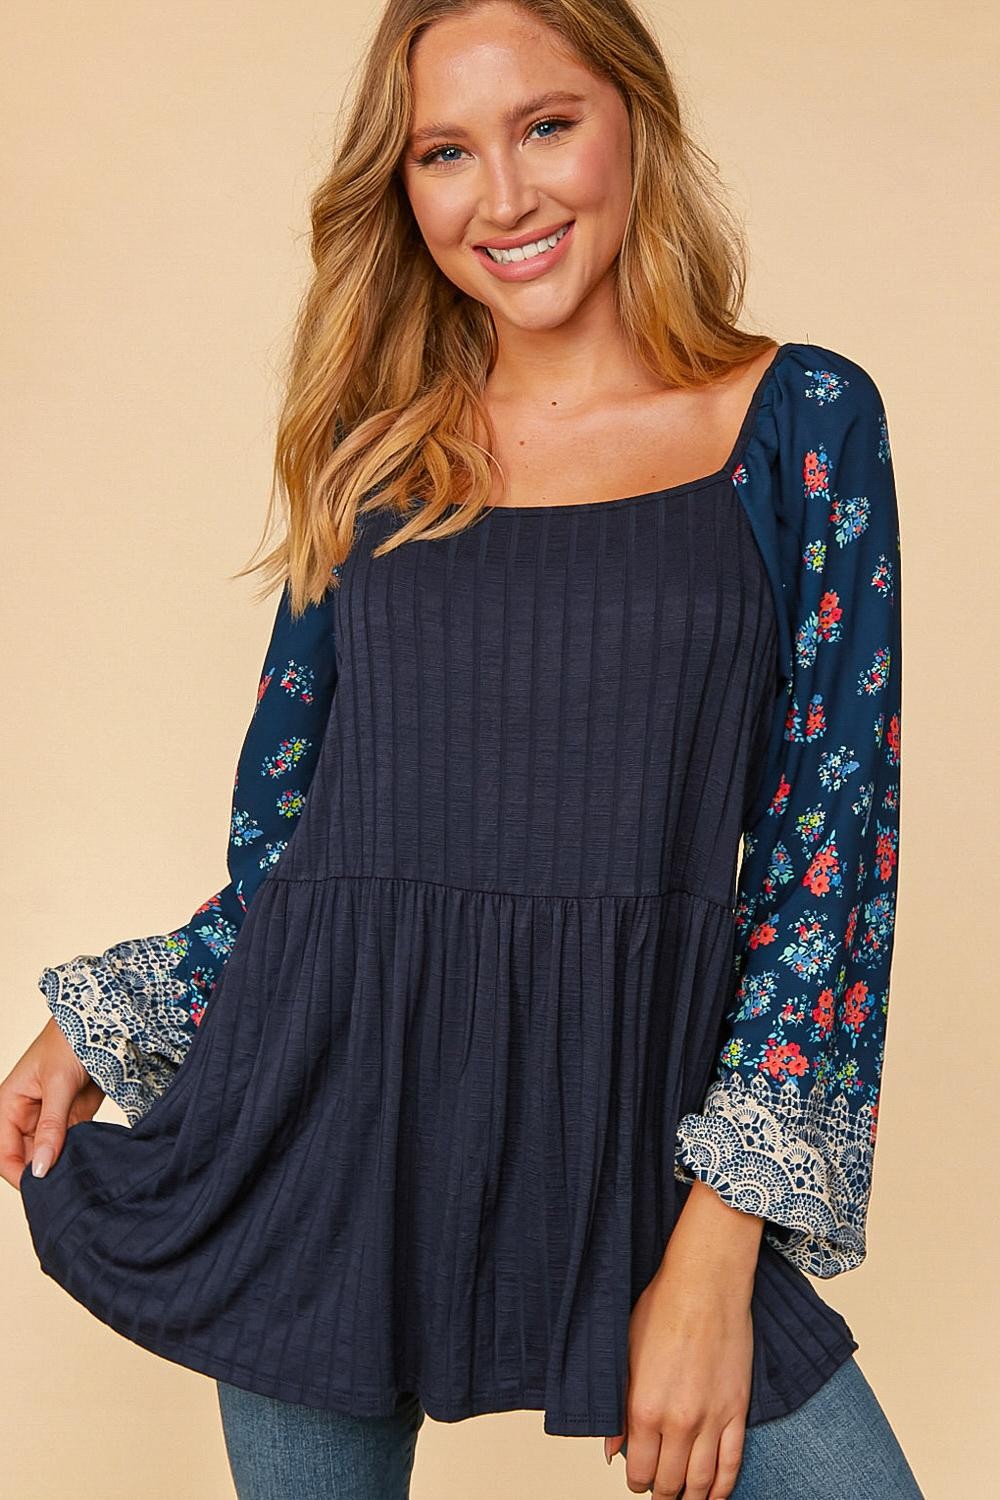 NAVY RIB SOLID FLORAL BORDER BUBBLE SLEEVE TOP-Mulberry Skies